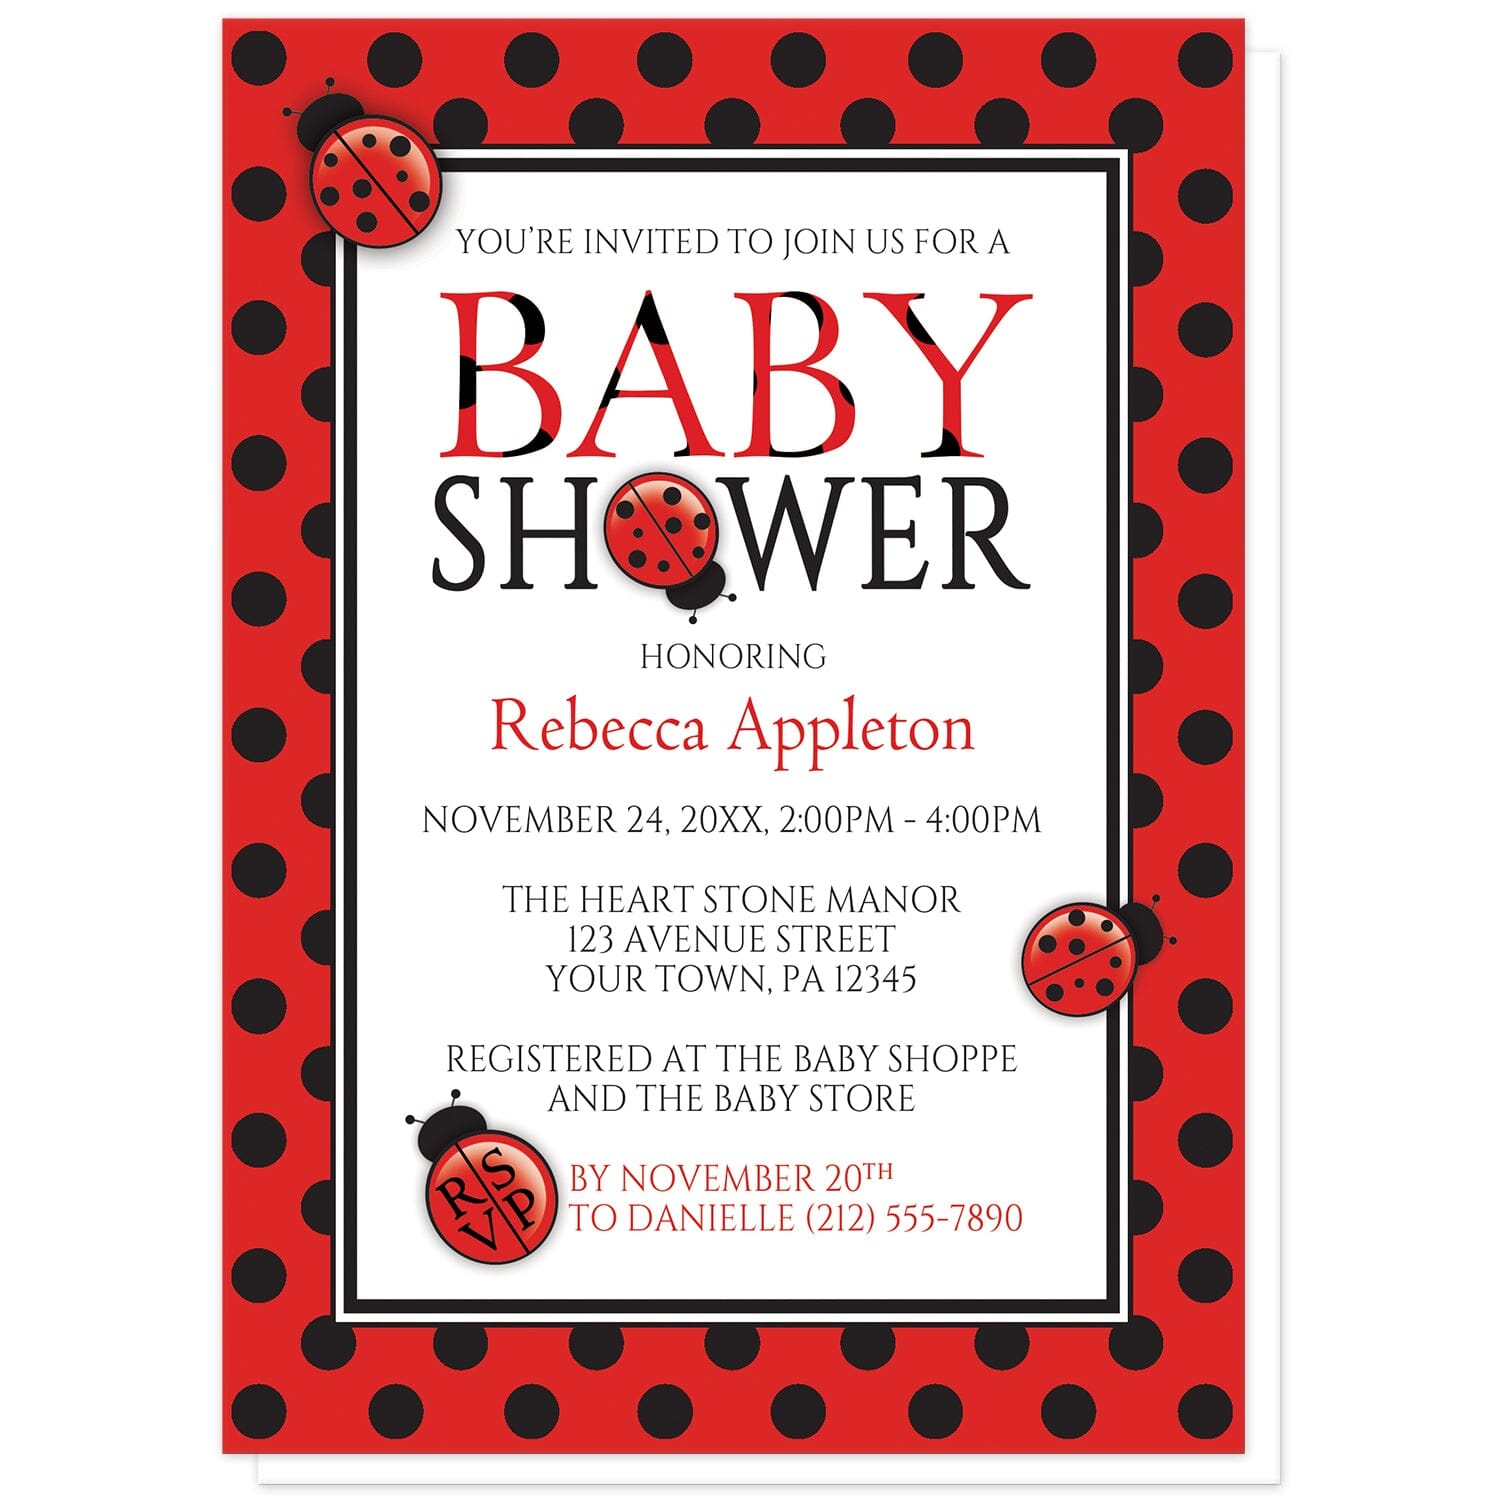 Polka Dot Red and Black Ladybug Baby Shower Invitations at Artistically Invited. Polka dot red and black ladybug baby shower invitations that are illustrated with cute ladybugs and a red and black polka dot pattern. The information you provide for your baby shower will be custom printed in red and black over white in the center. 